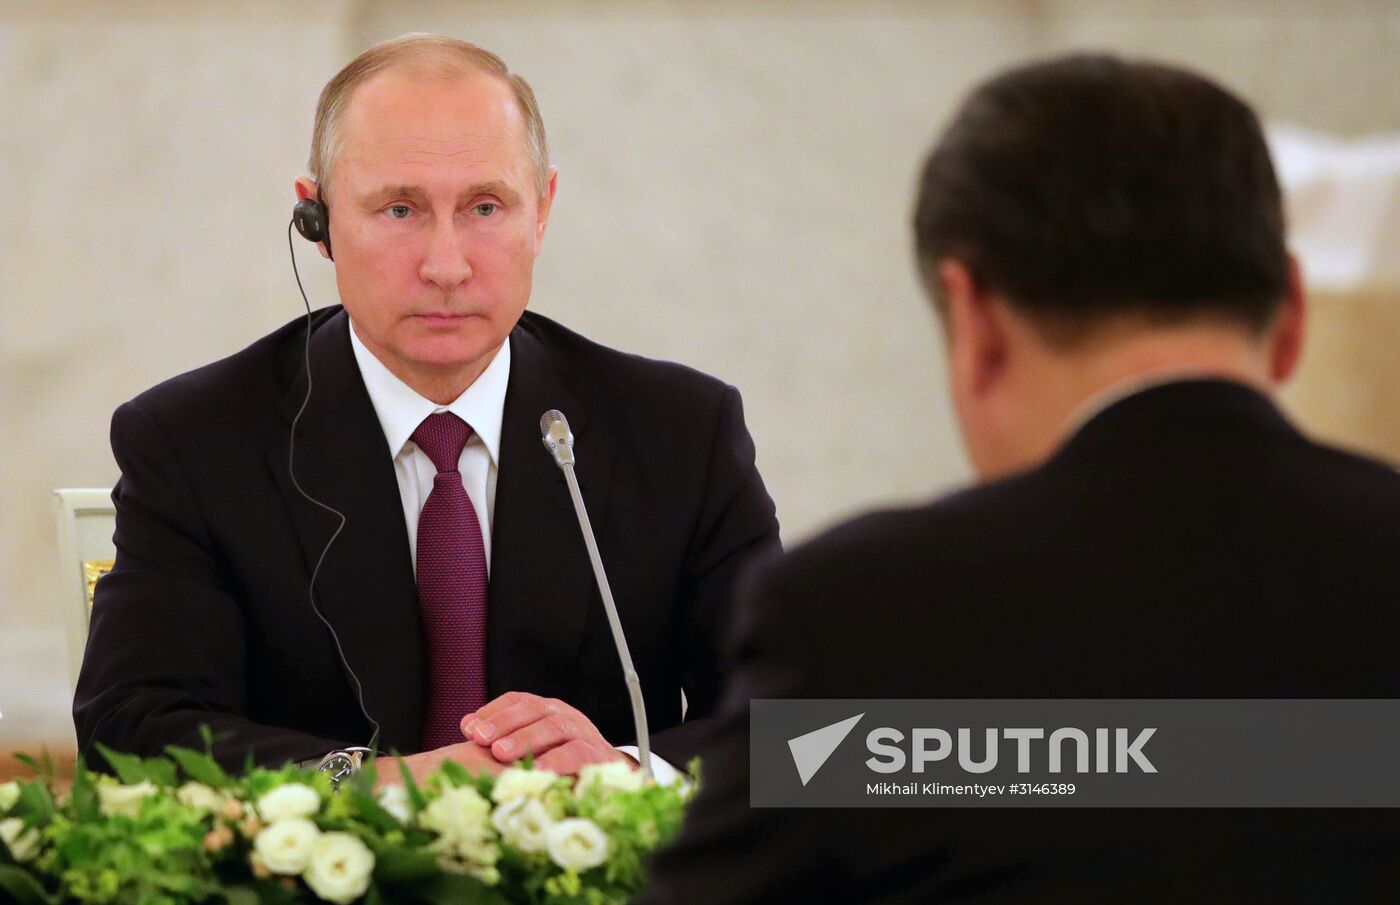 Russian President Vladimir Putin meets with Xi Jinping in Moscow